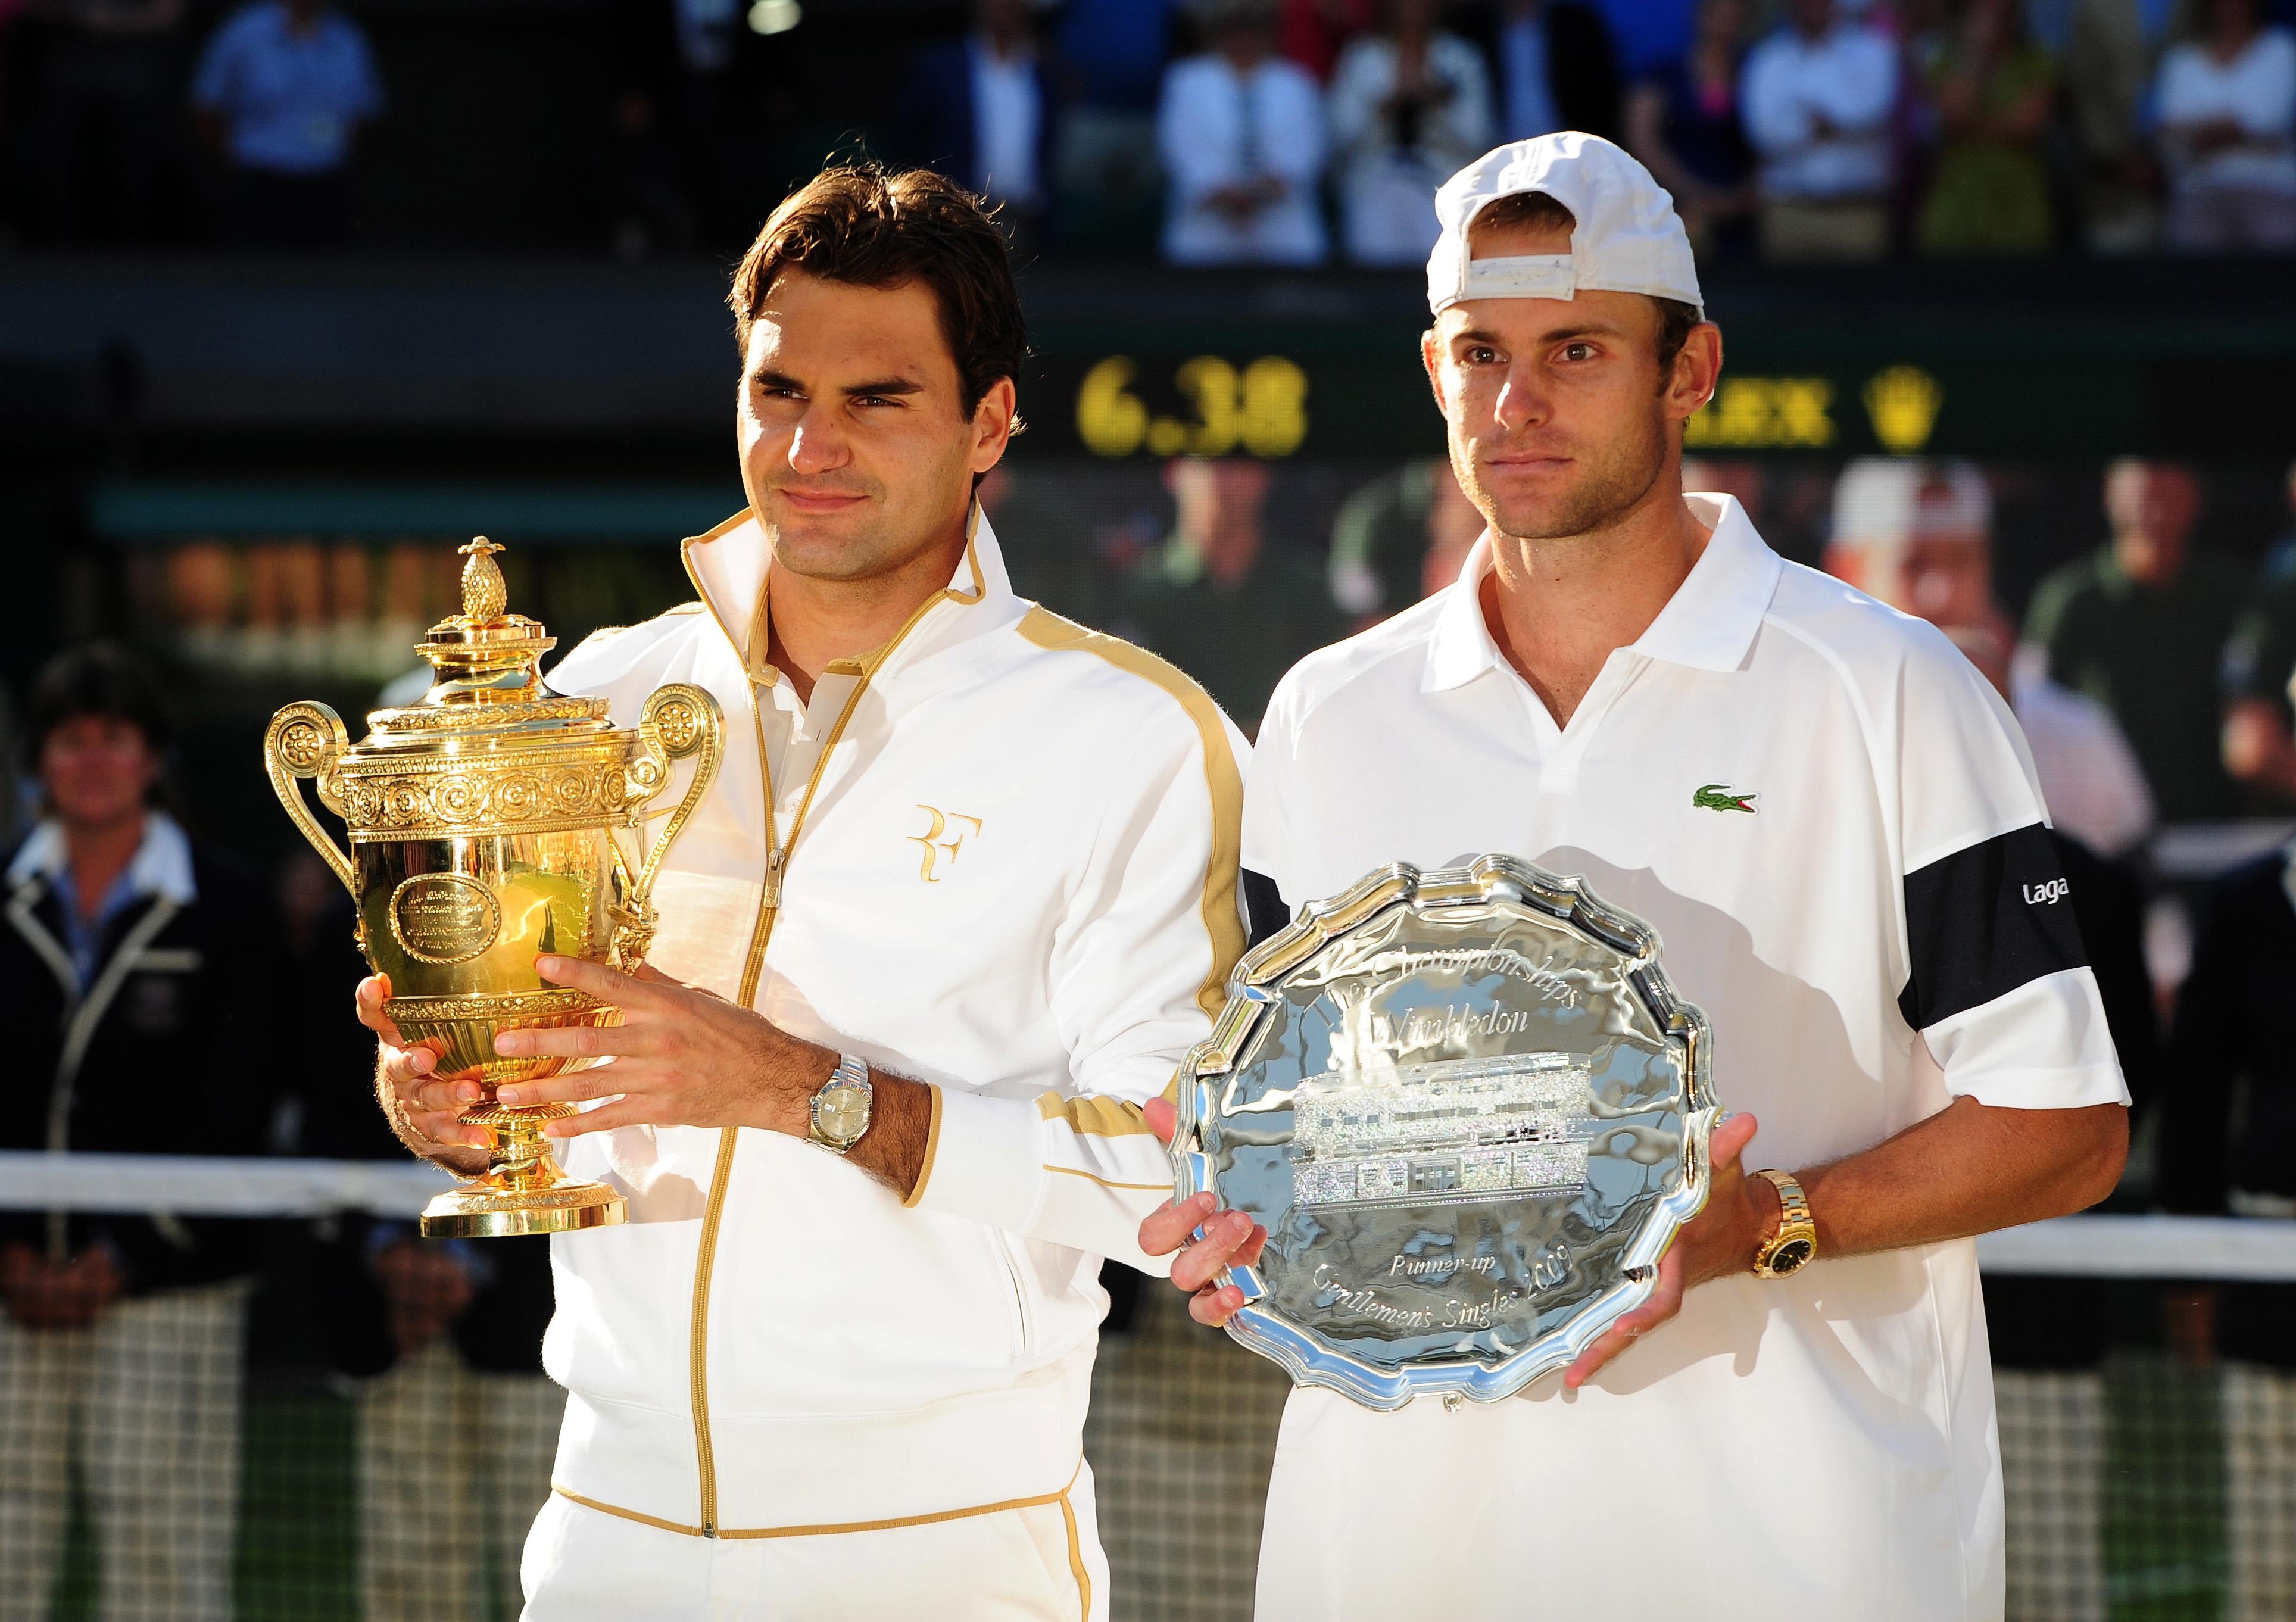 Roger Federer beat Andy Roddick over five sets in the 2009 Wimbledon final to surpass Pete Sampras’ record of 14 majors (Owen Humphreys/PA Archive)